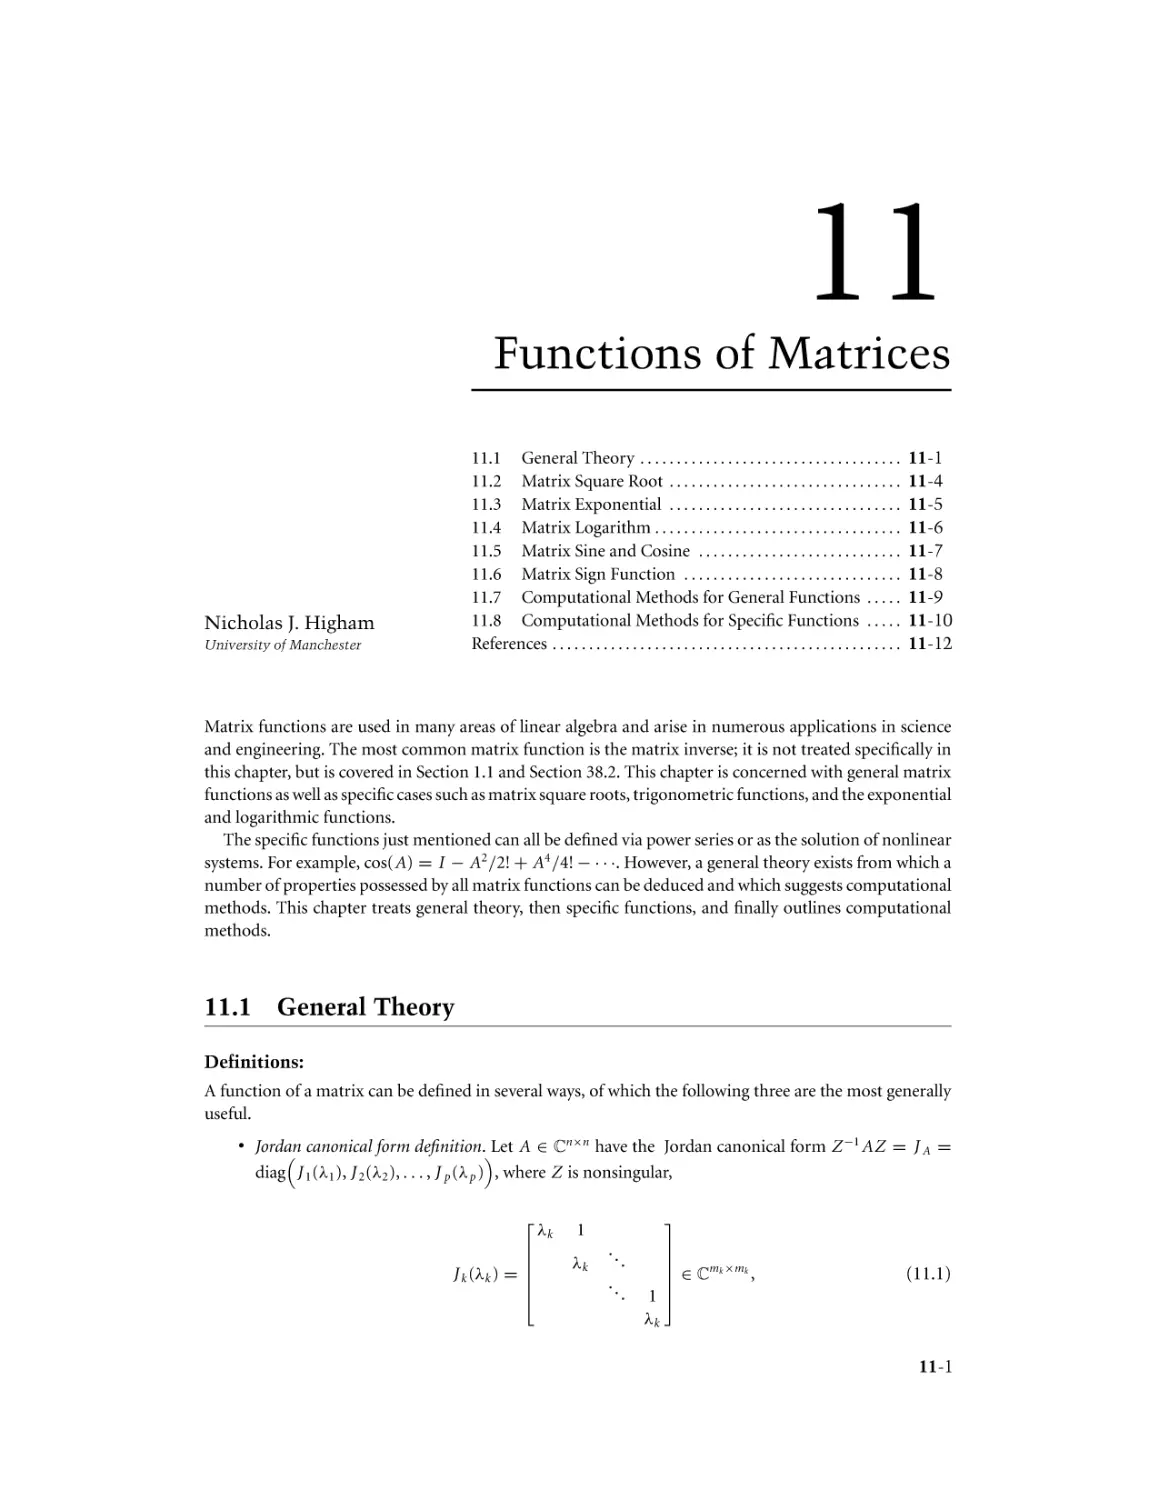 Chapter 11. Functions of Matrices